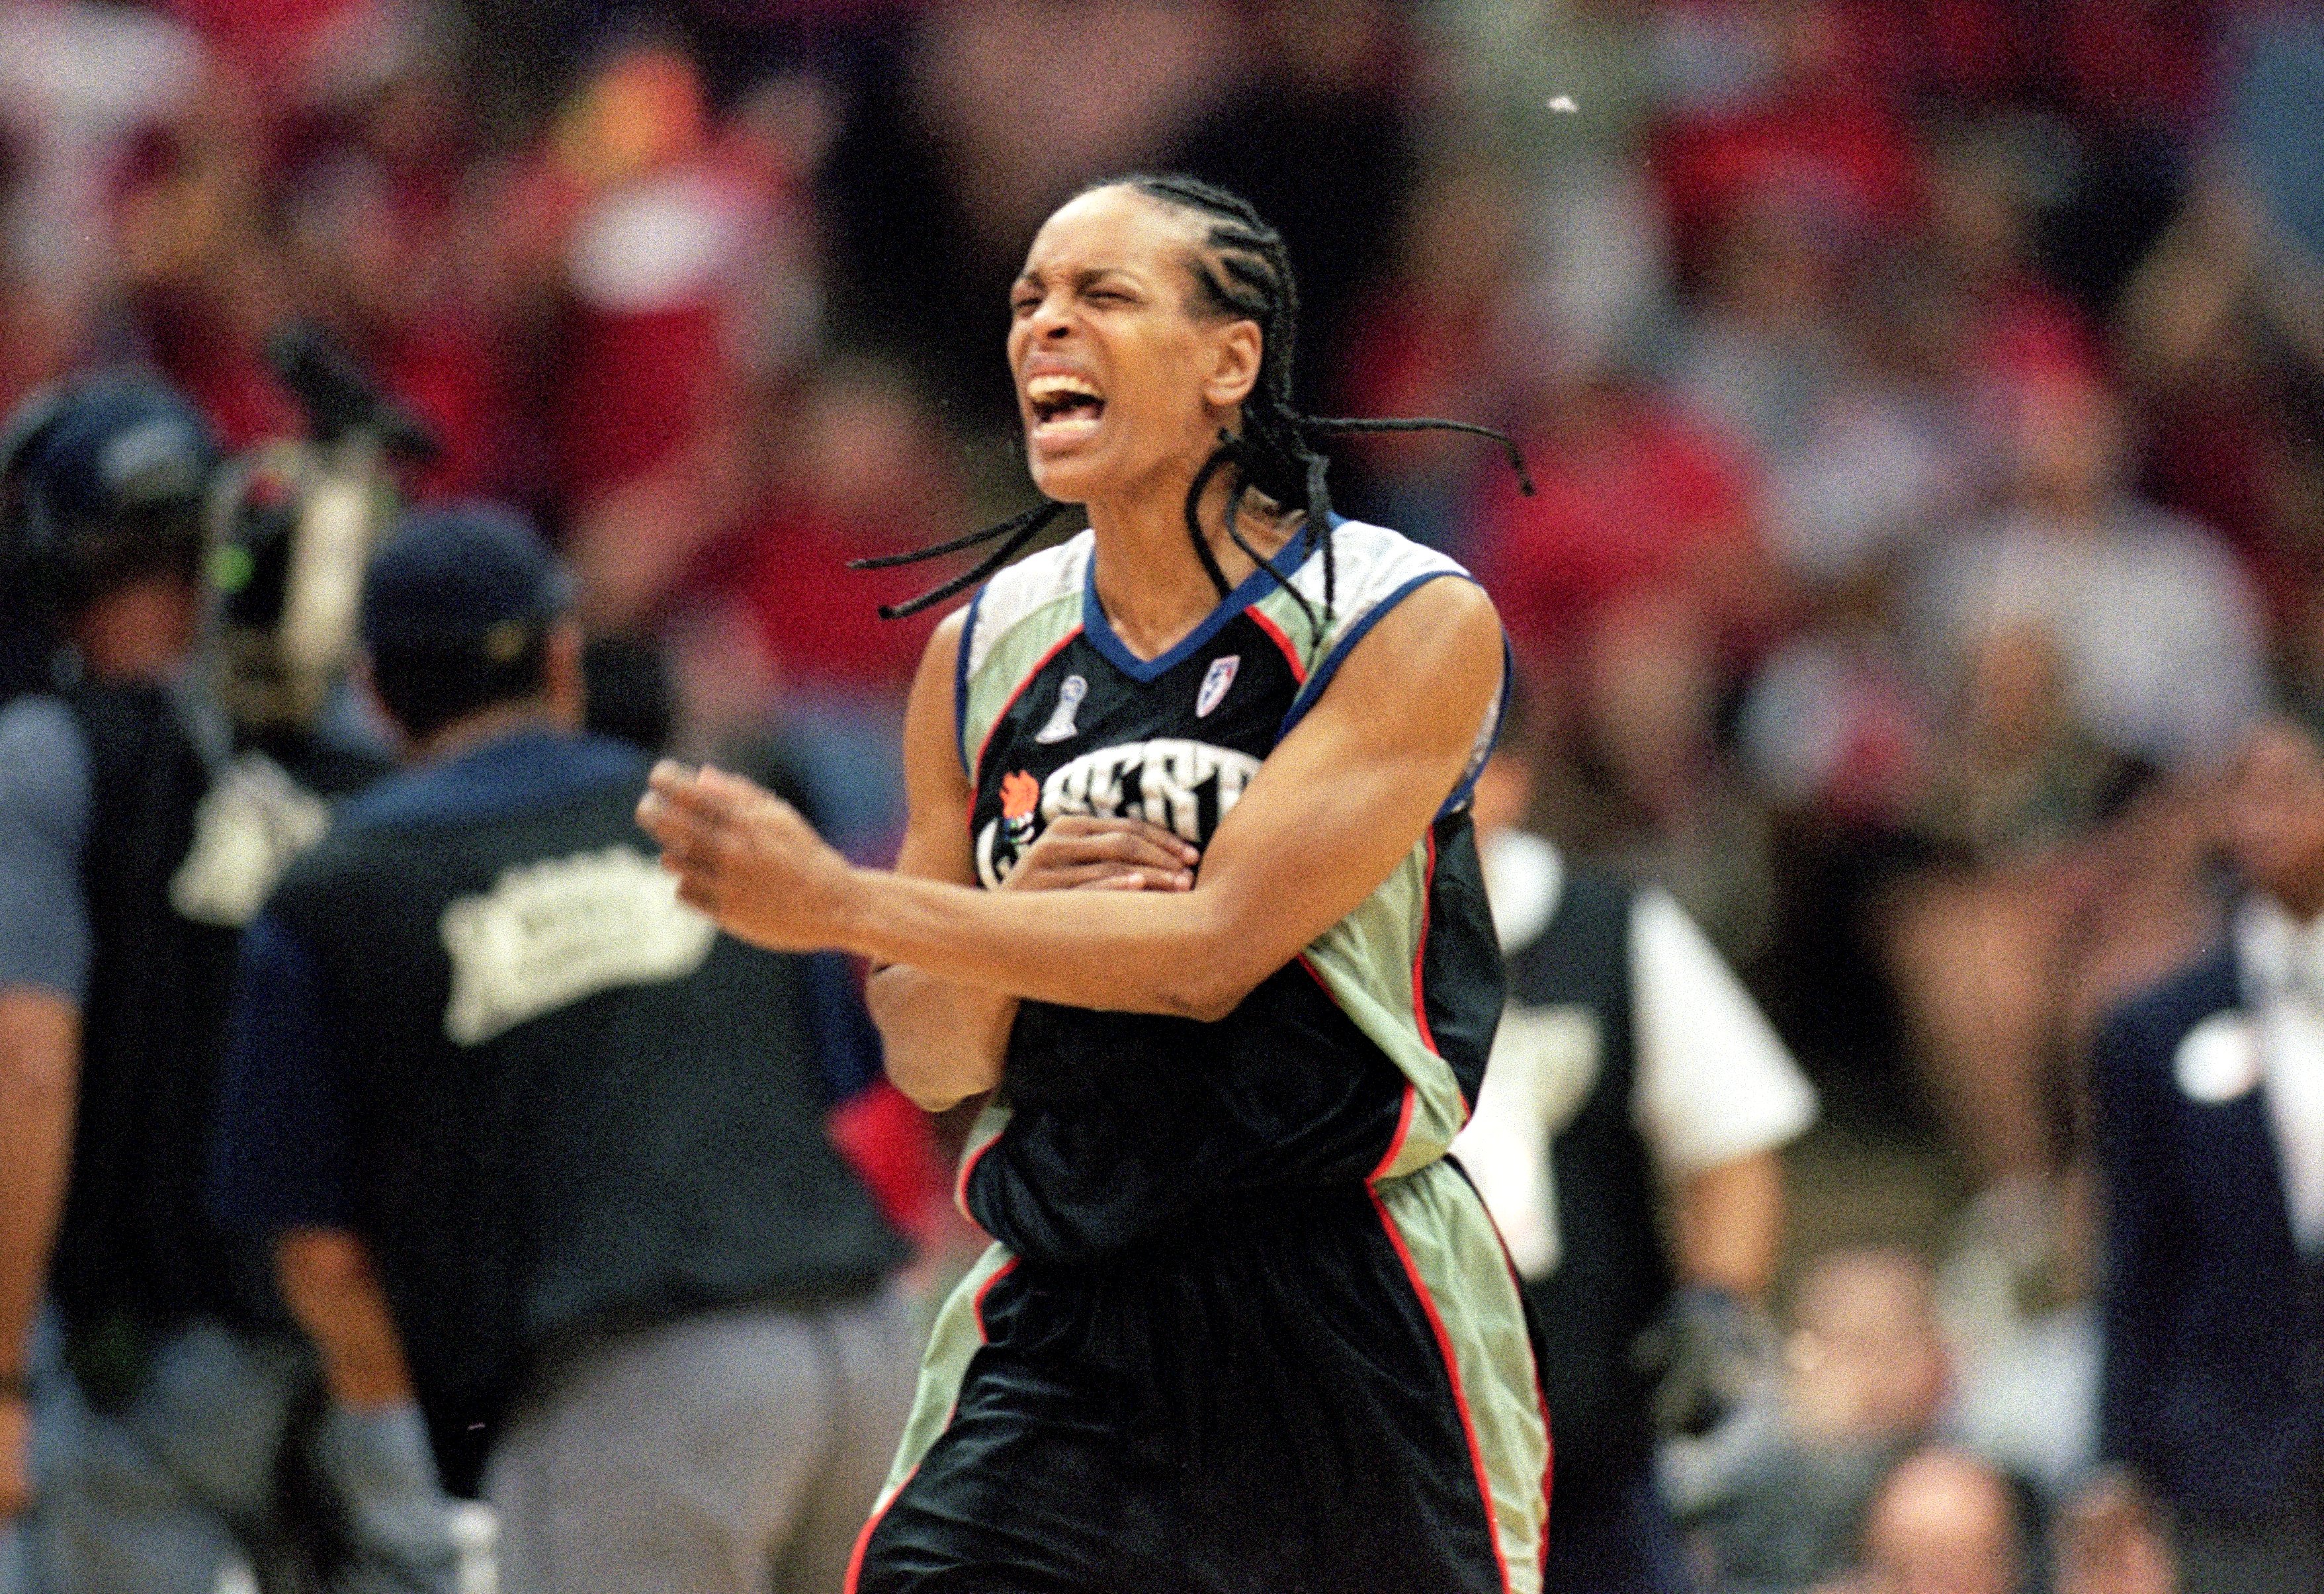 WNBA legend Weatherspoon remembers first game in league history AOL News